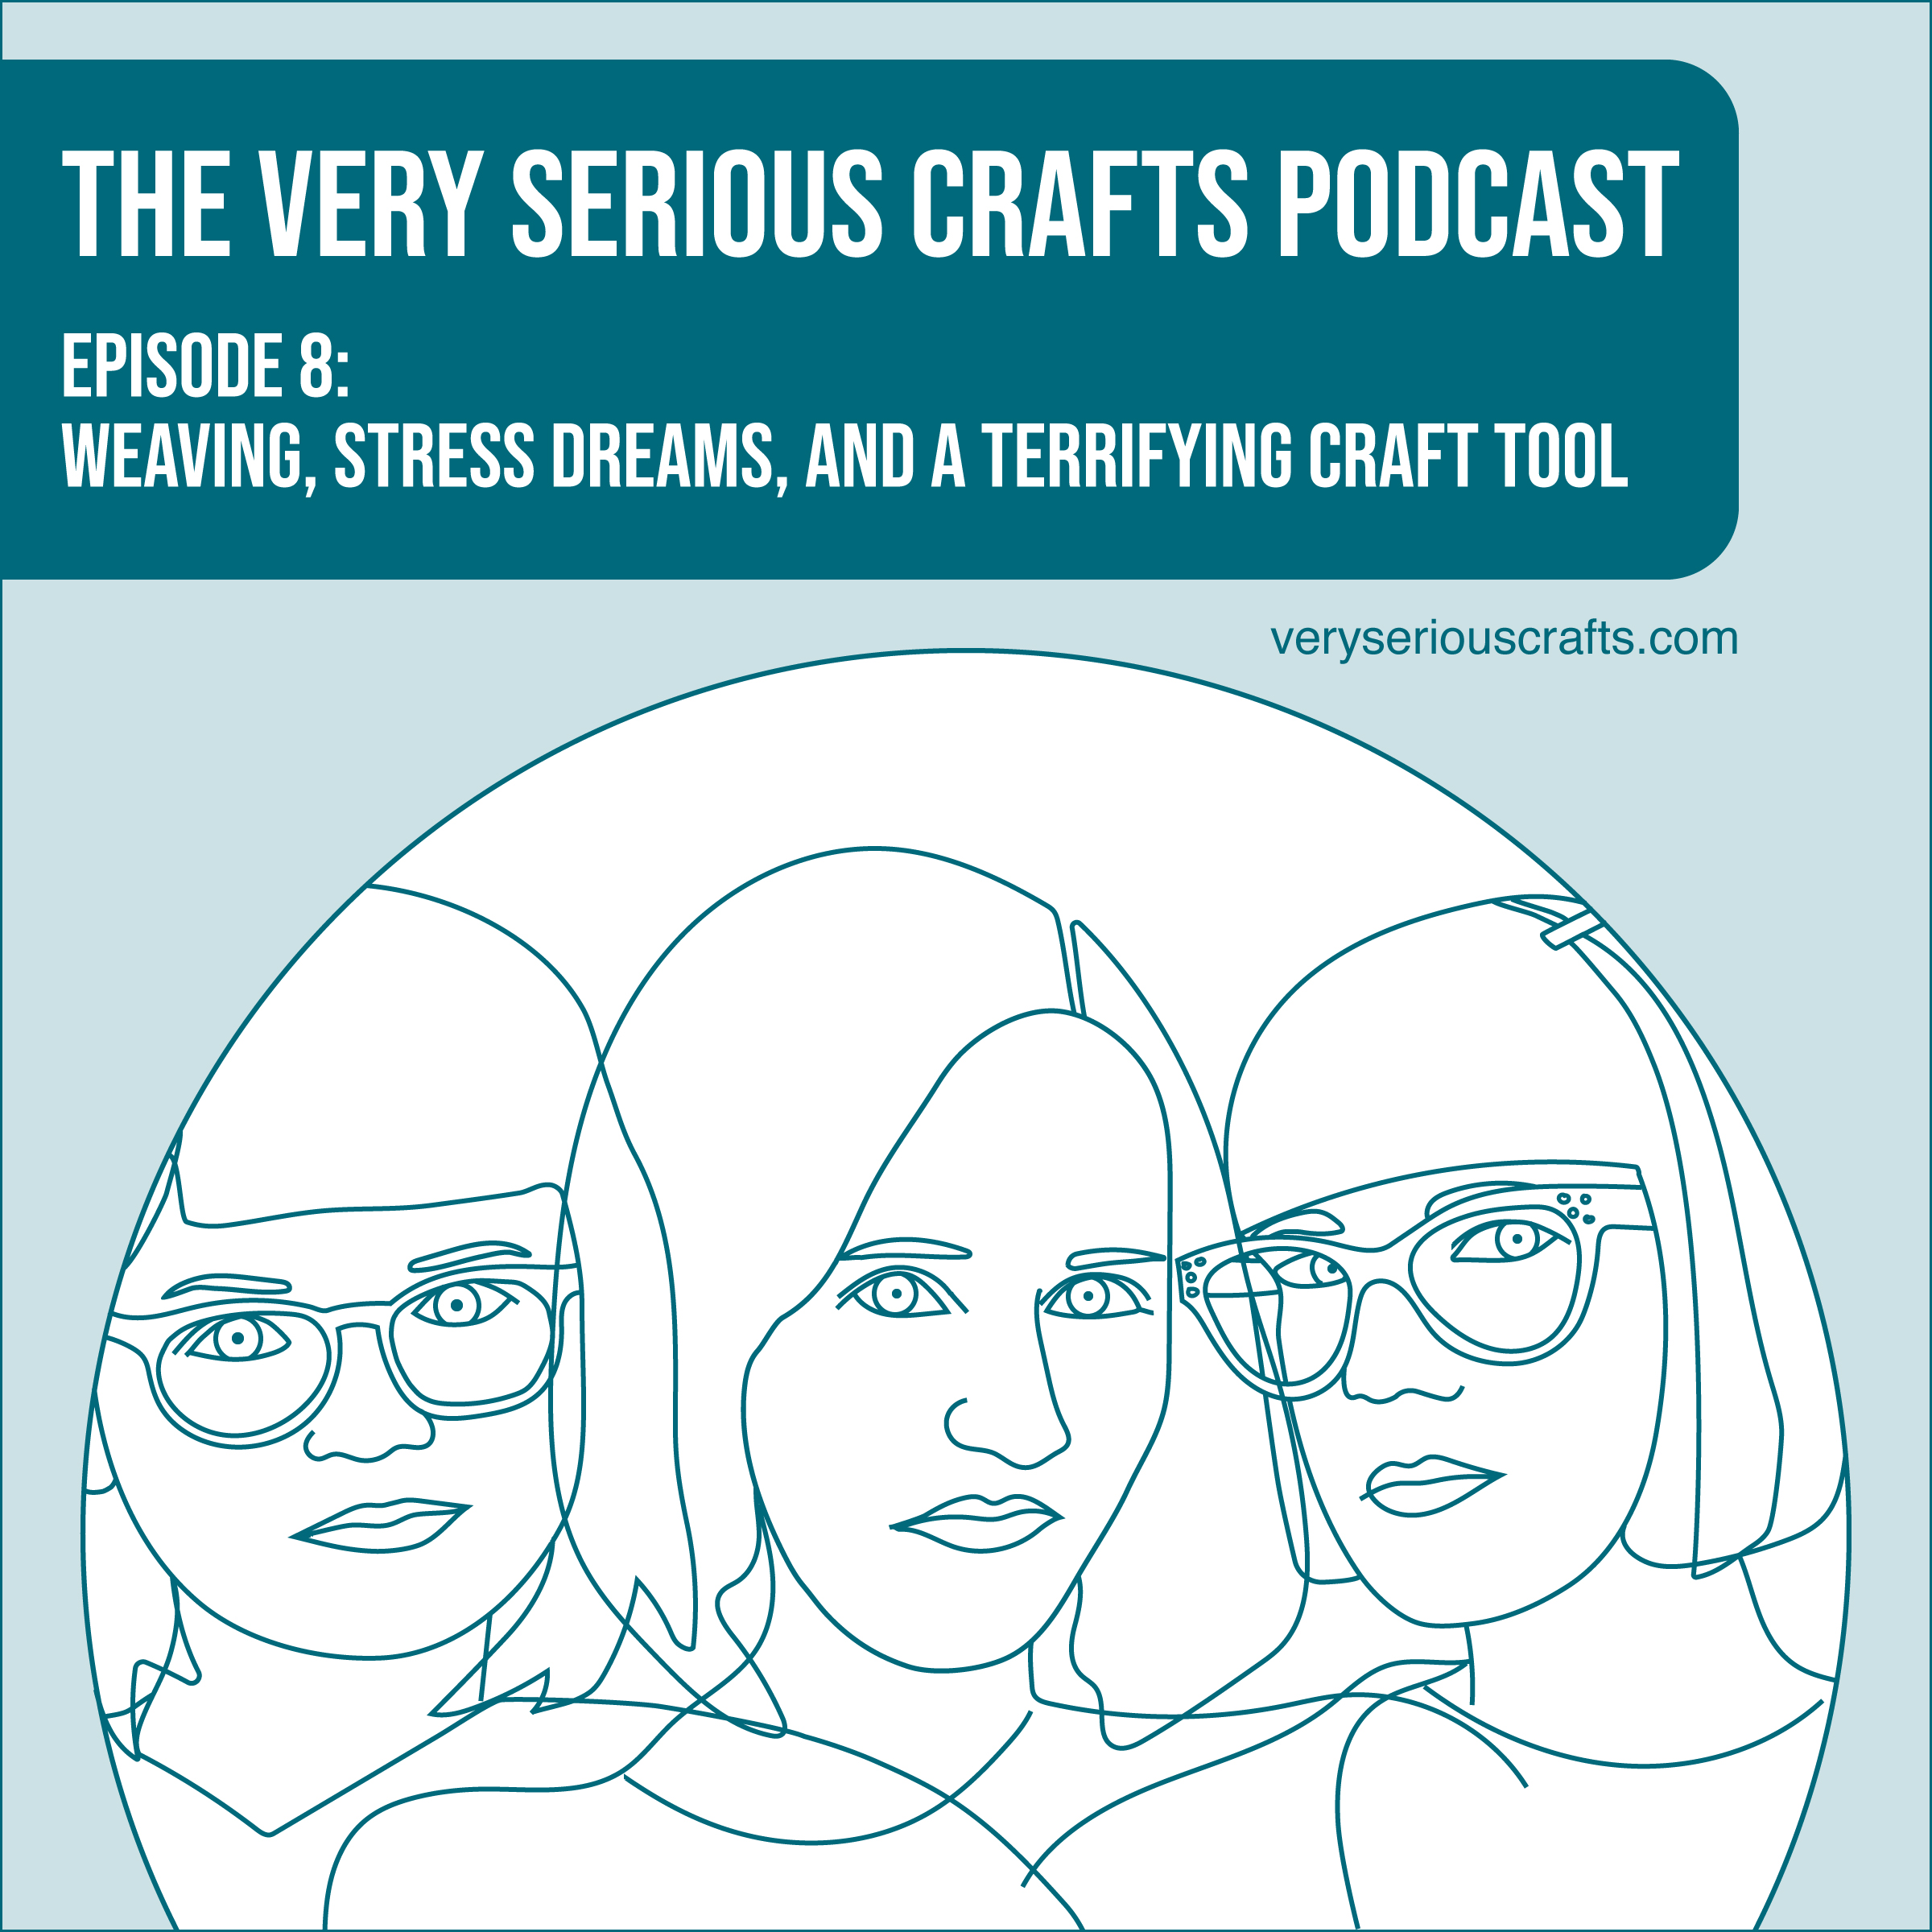 S1E08: Weaving, Stress Dreams, and a Terrifying Craft Tool